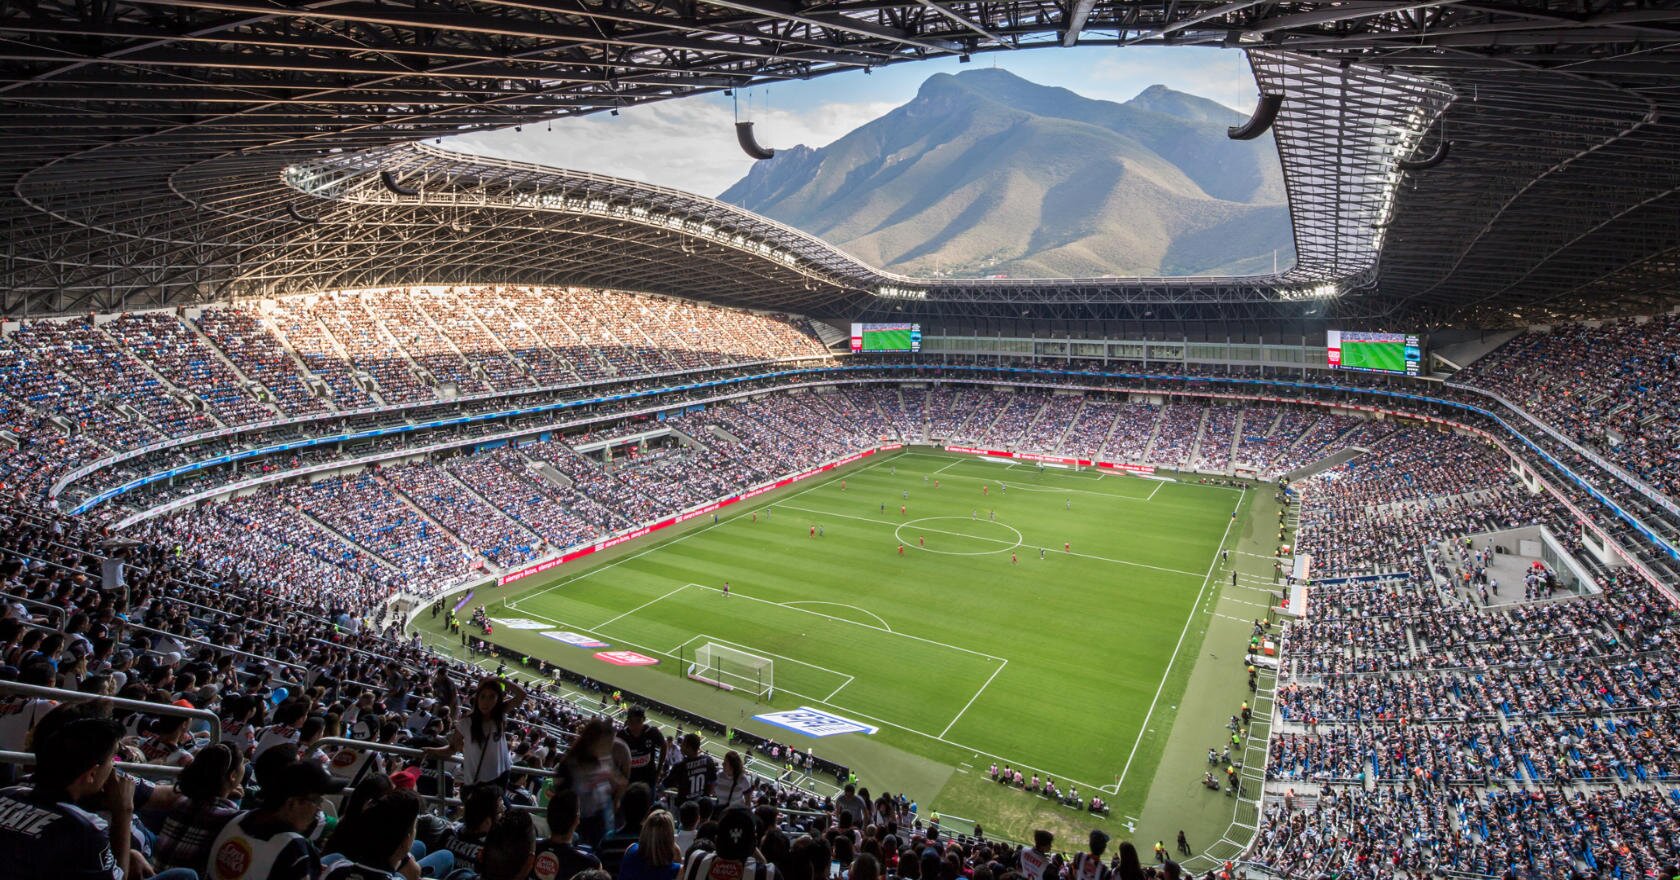 Top 10 most scenic football stadiums in the world